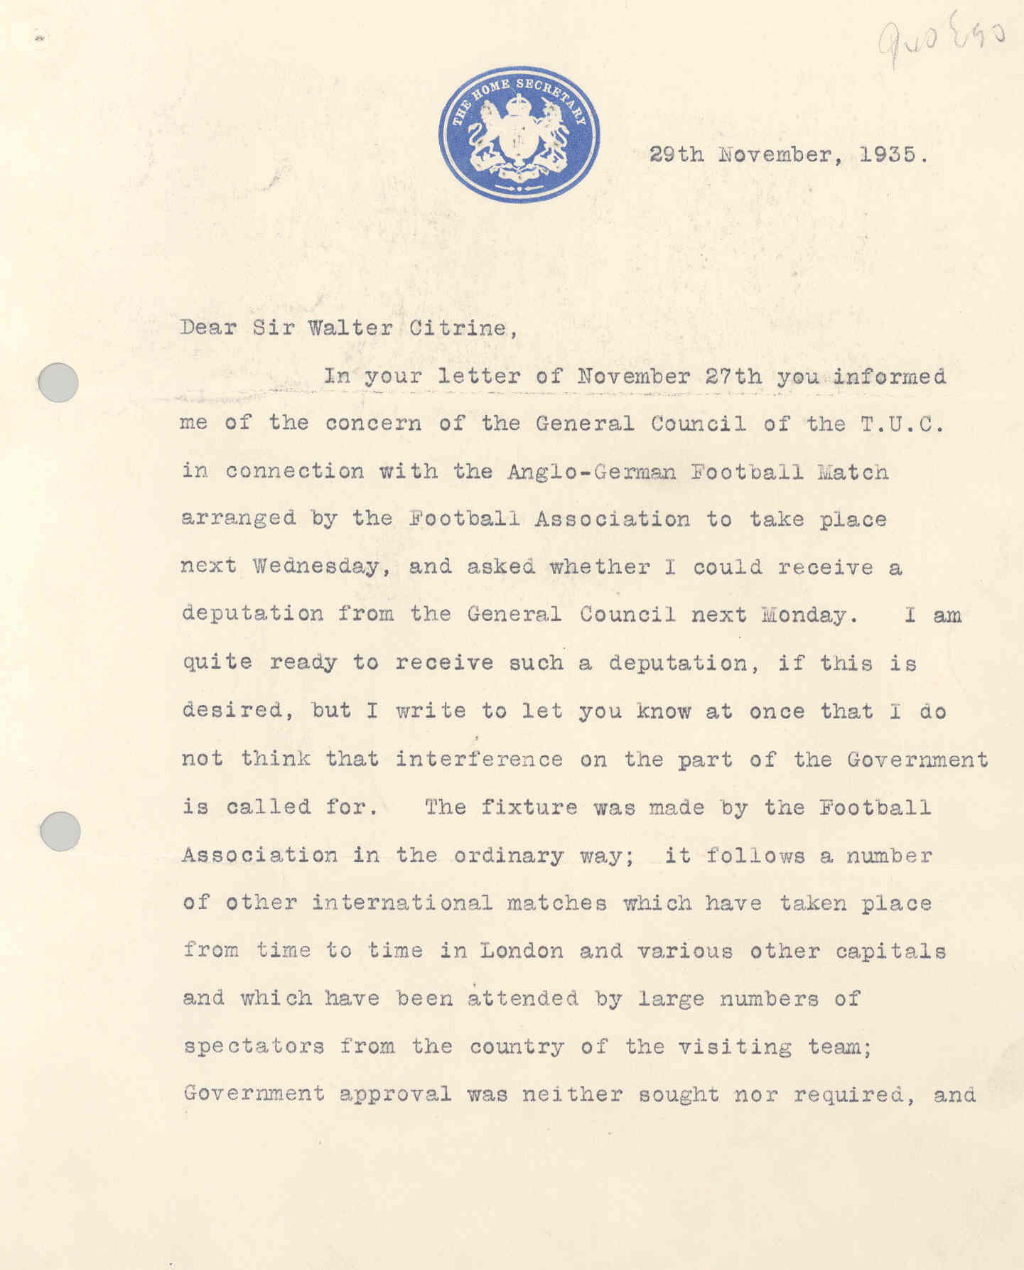 Letter regarding proposed Anglo-German football match, 1935